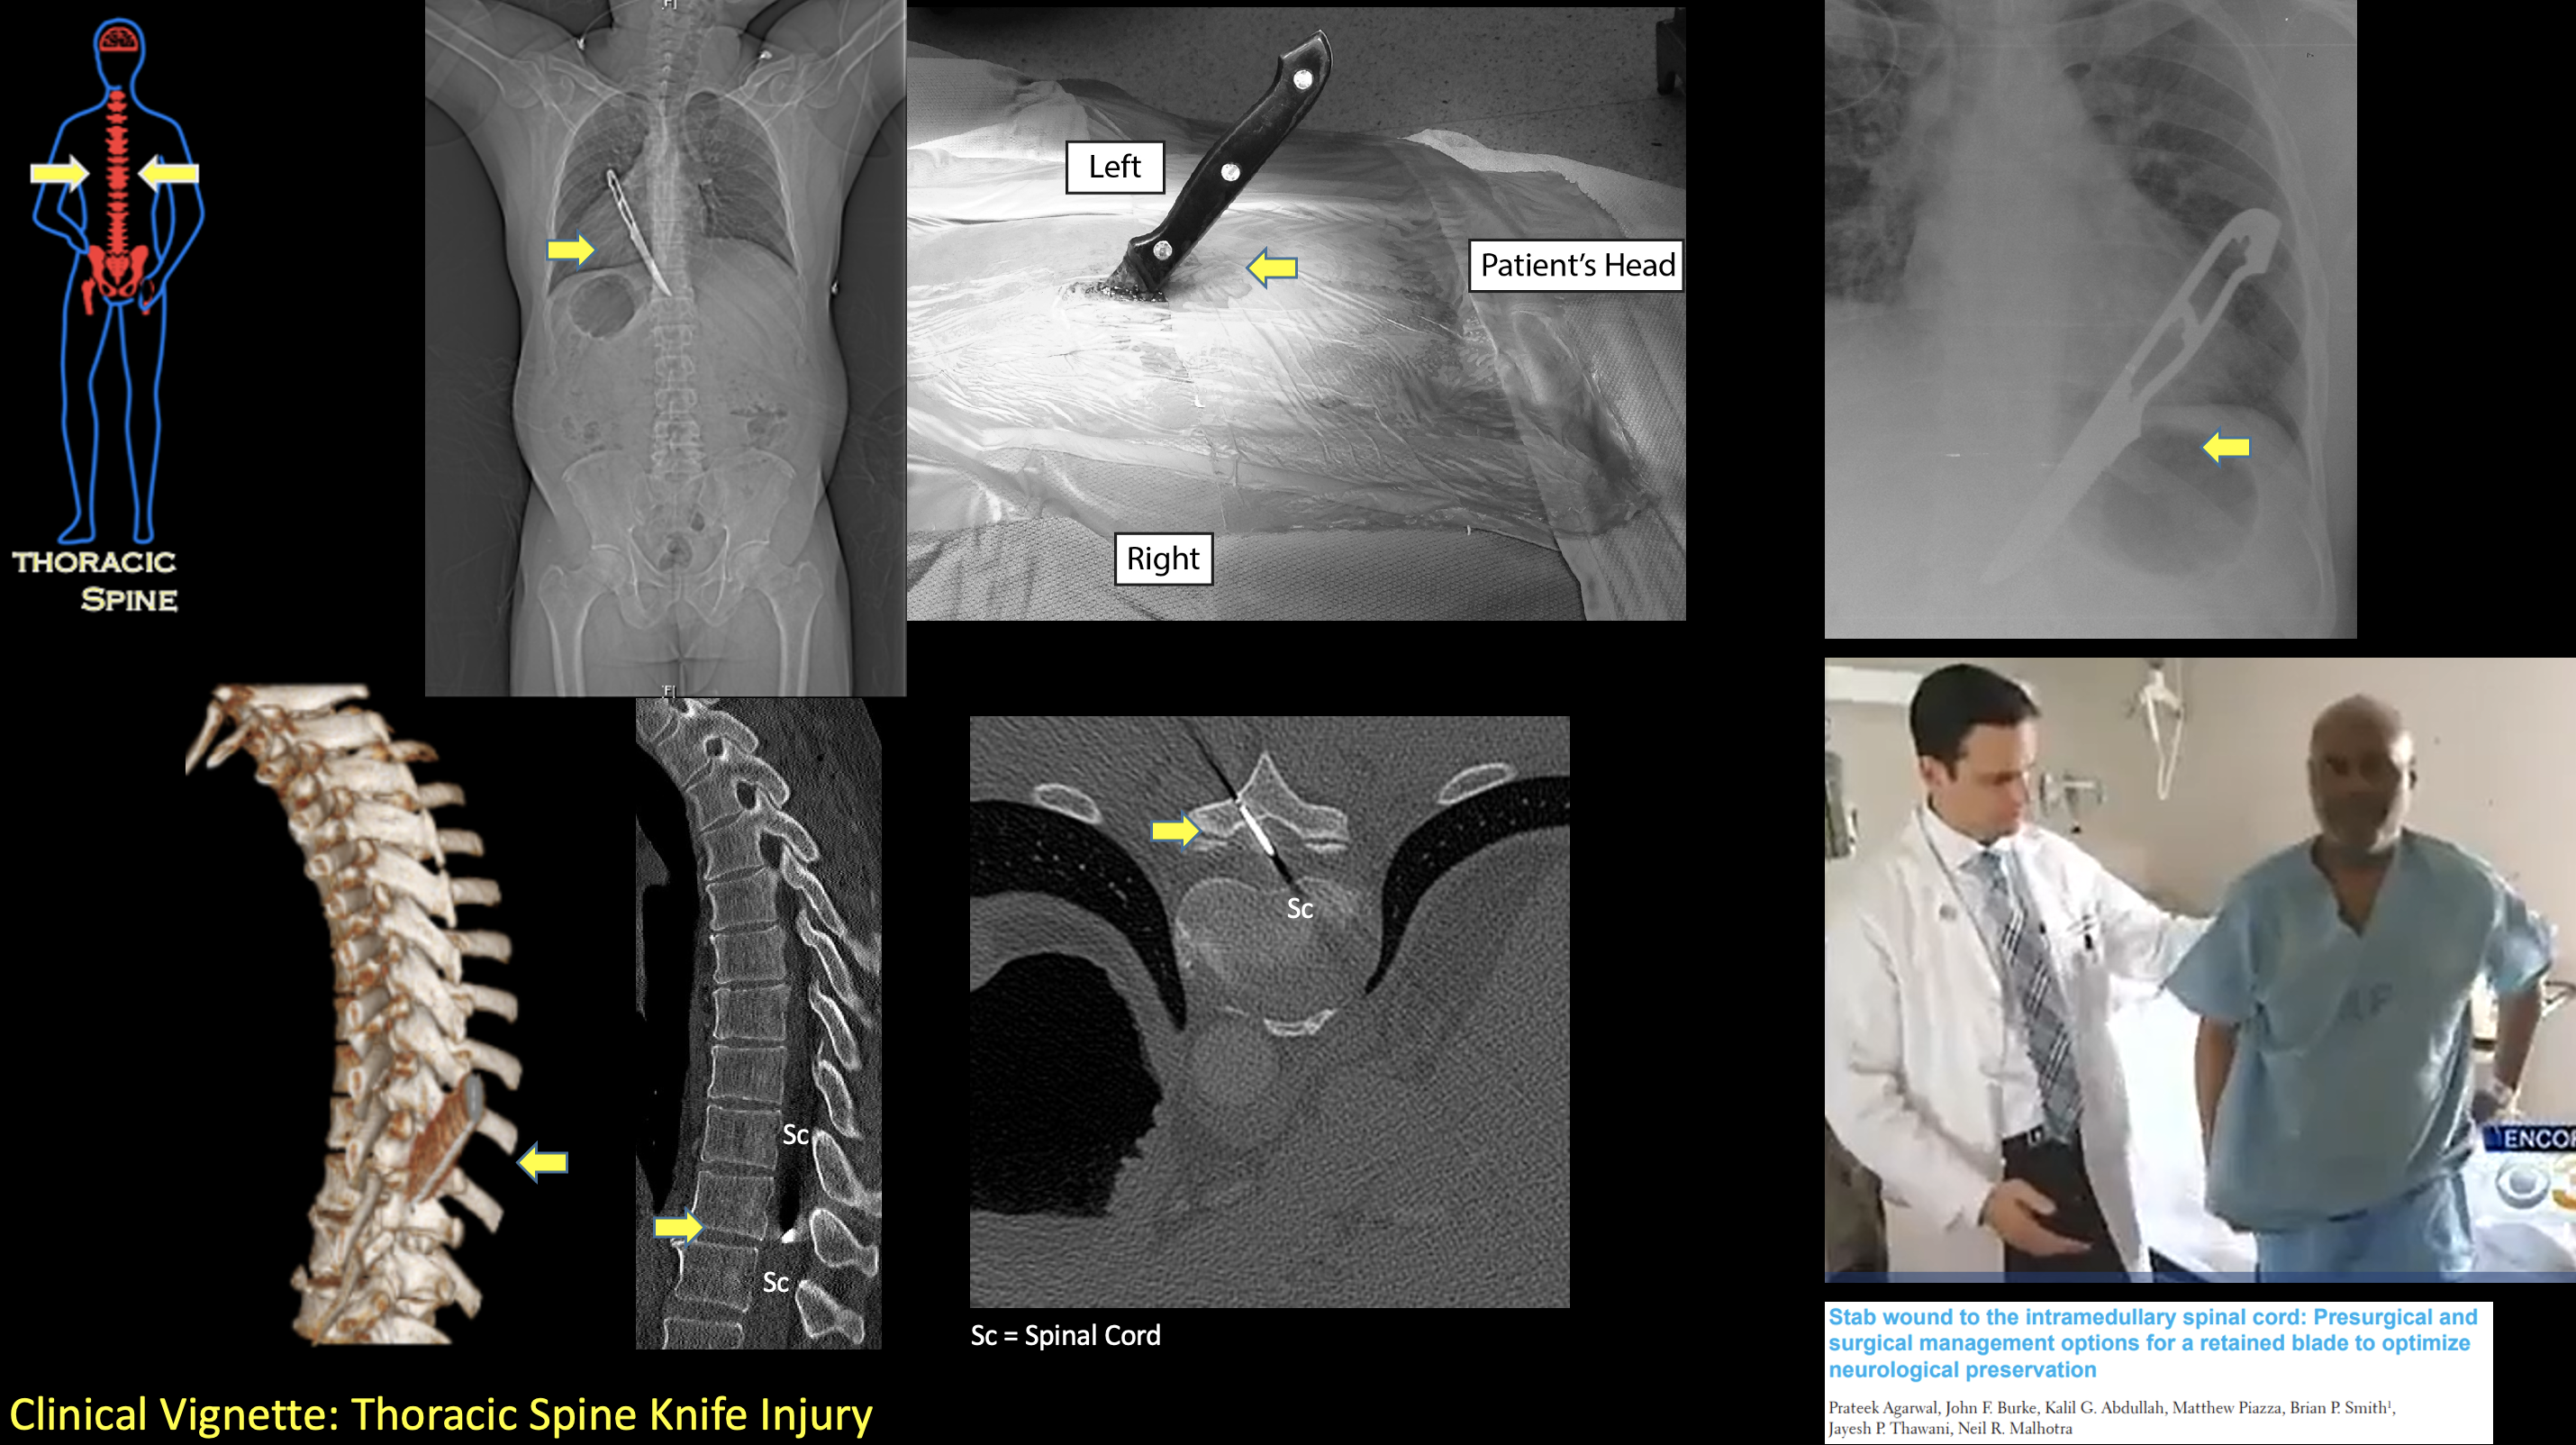 Thoracic Spine Knife Injury